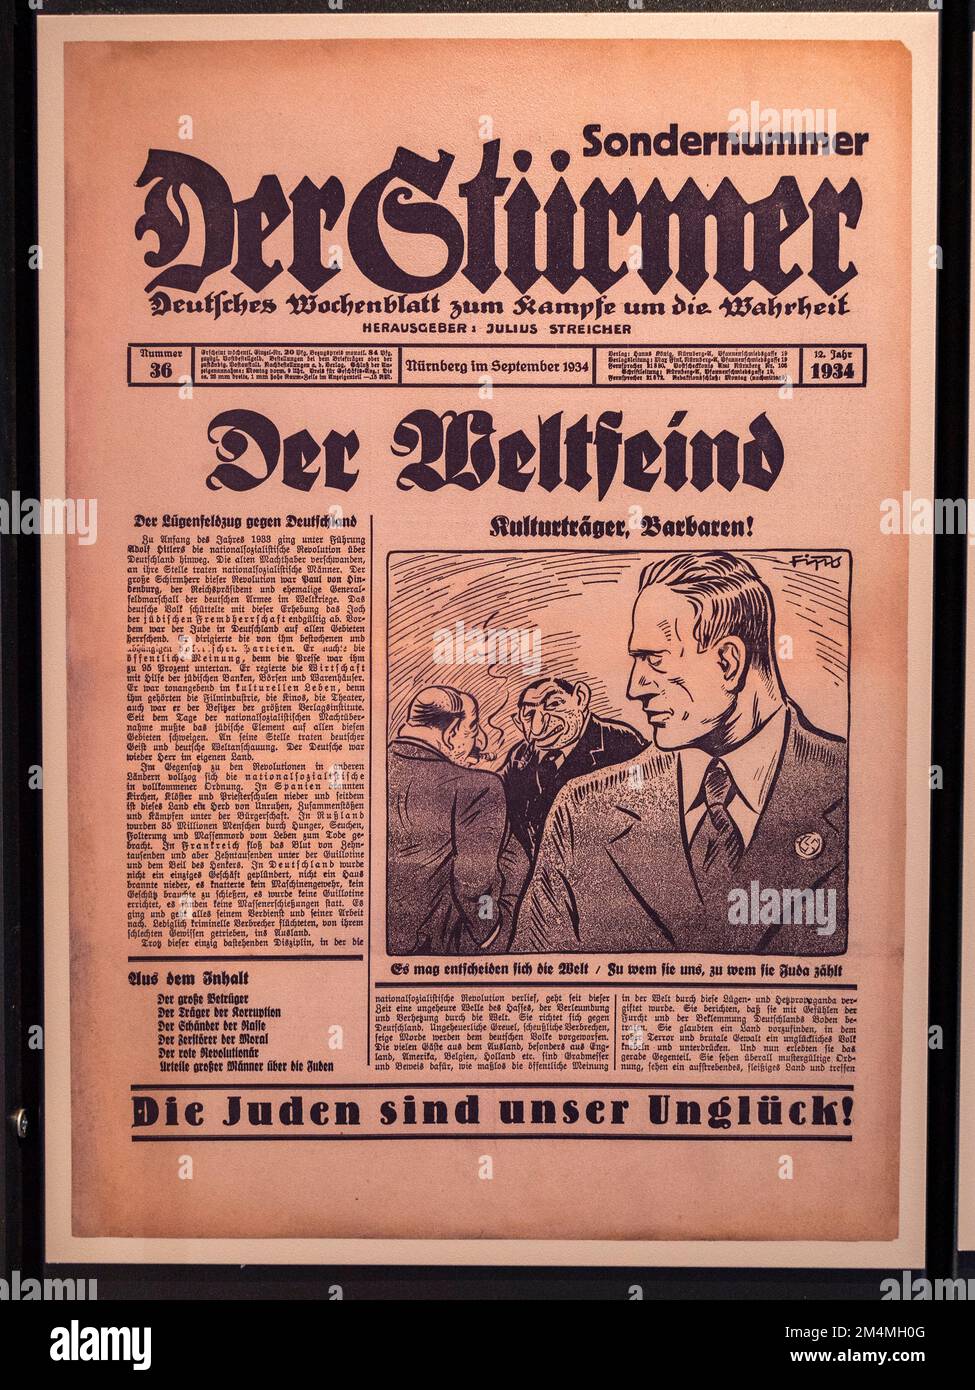 'Der Stürmer' (The Striker') with anti-semitic front page in September 1934 a weekly German tabloid-format, Imperial War Museum, London, UK. Stock Photo